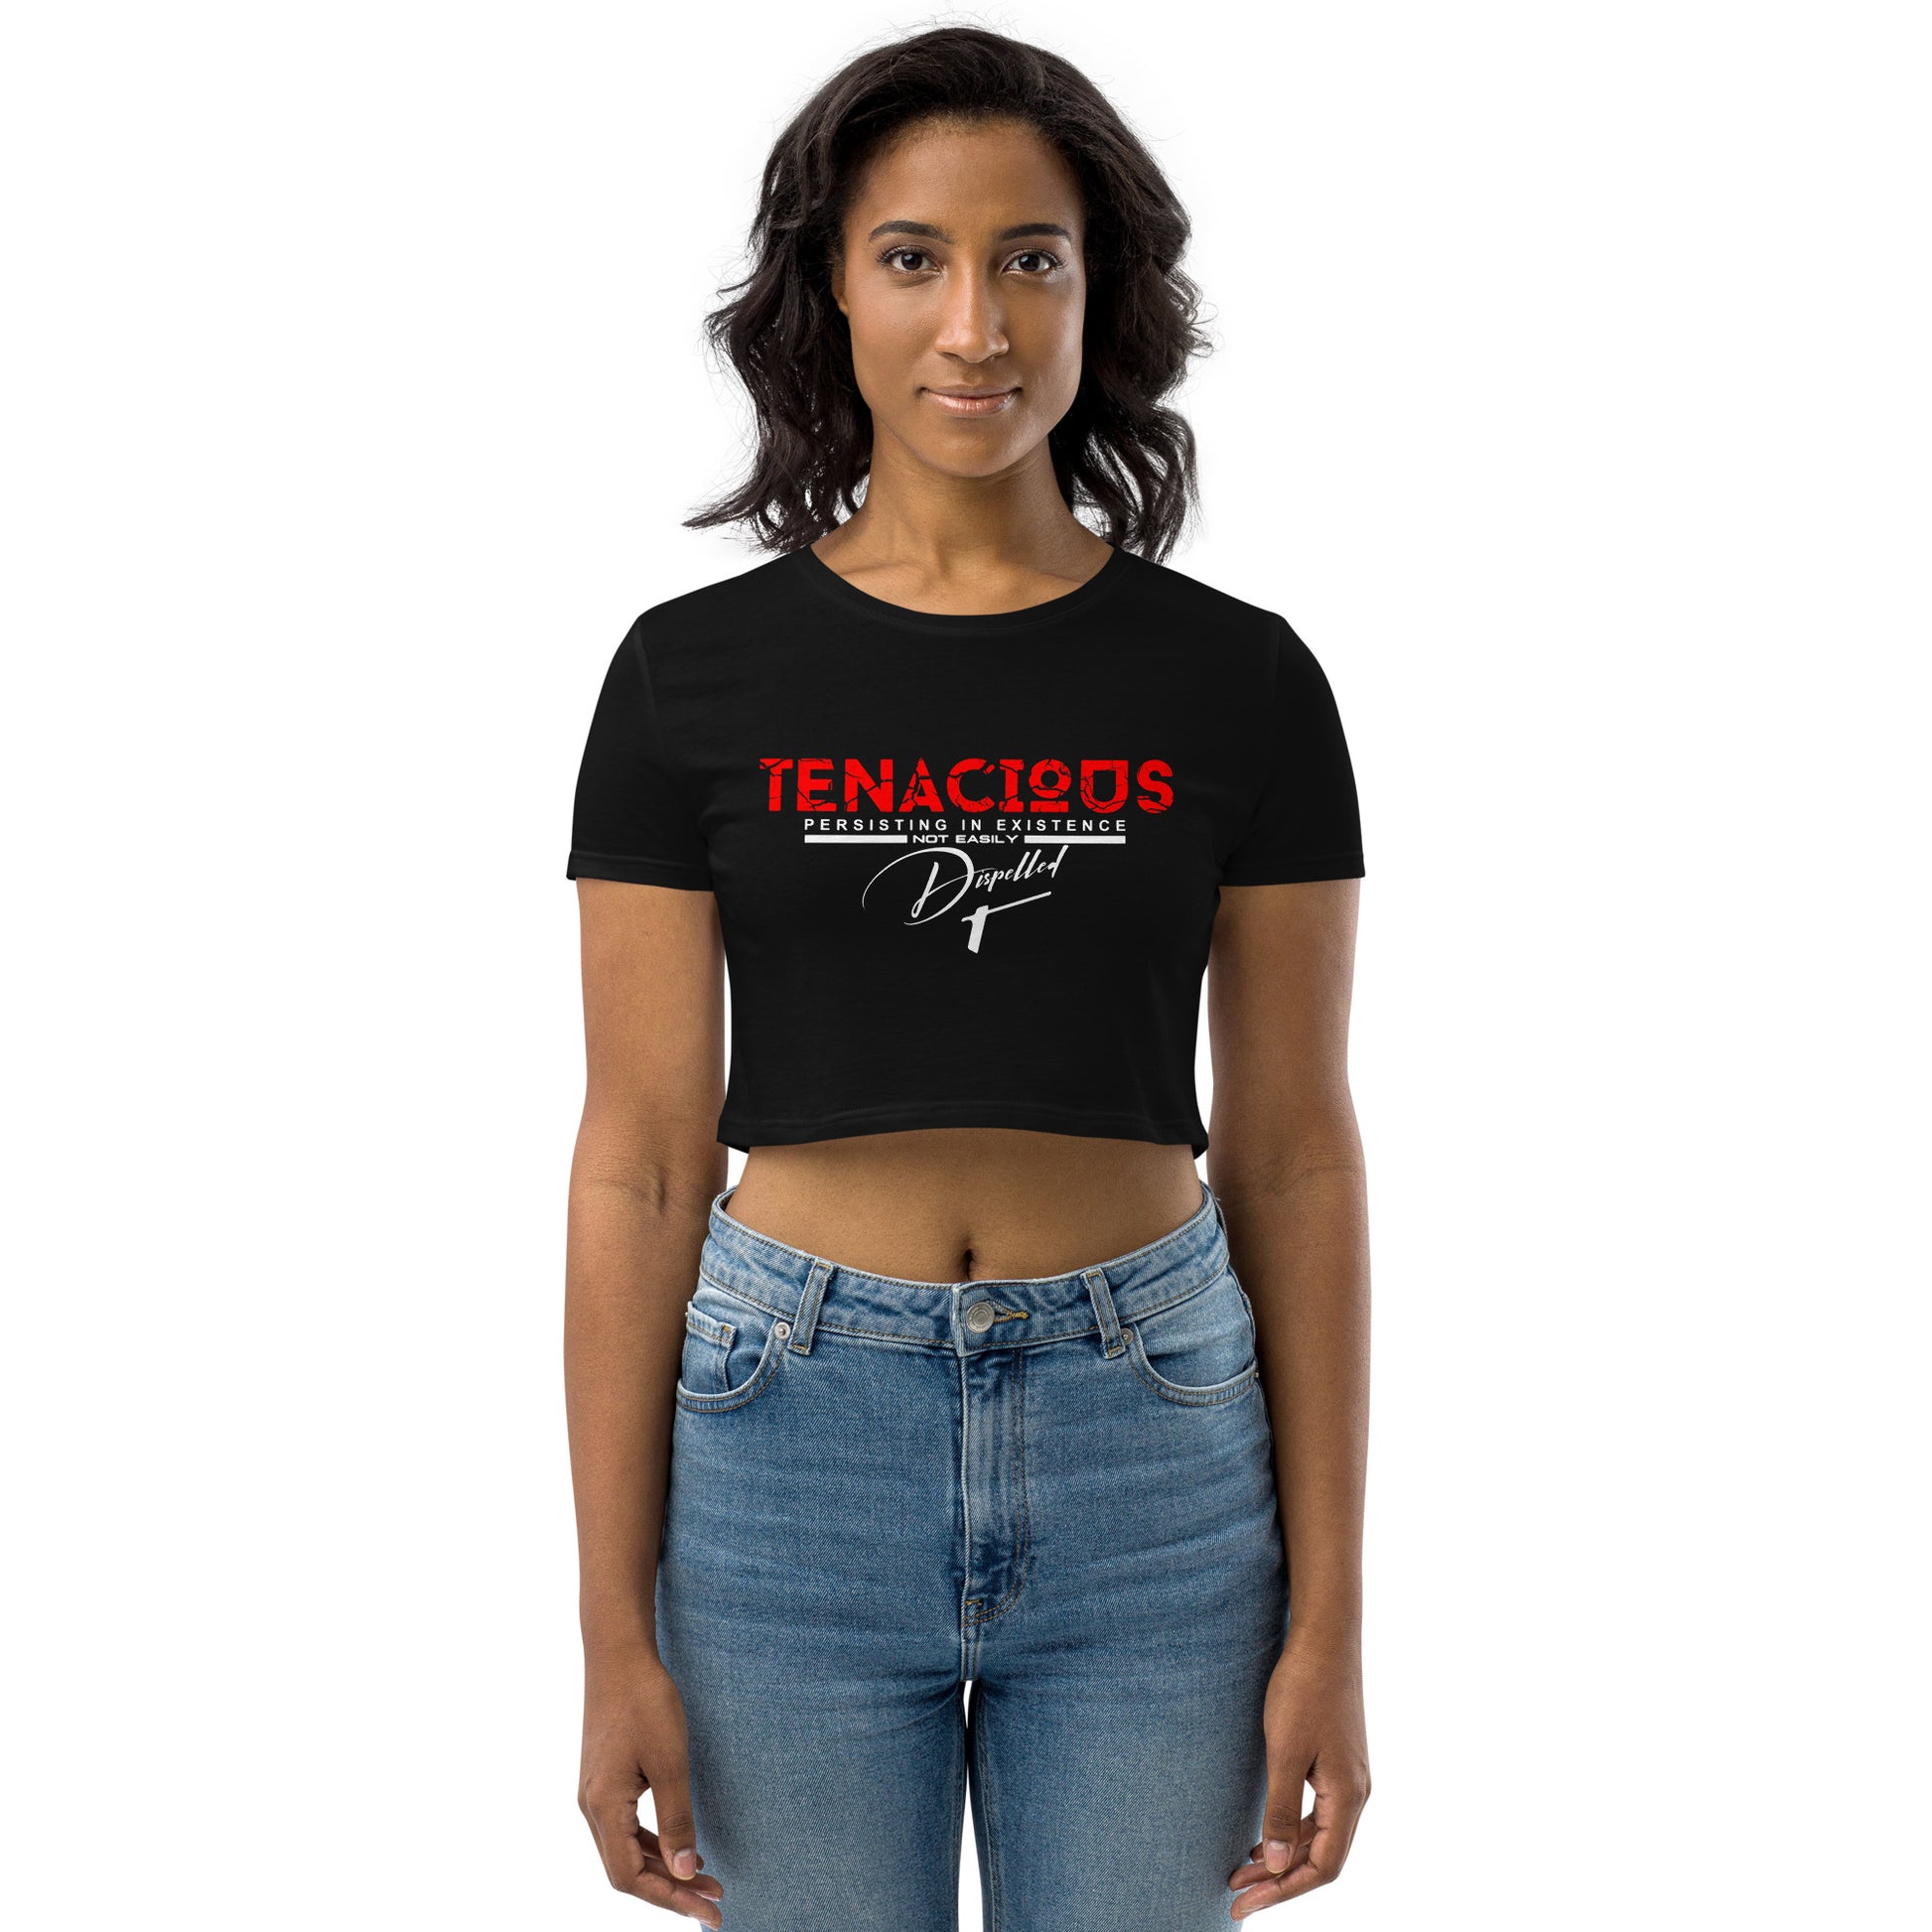 TRA "TENANCIOUS" Organic Crop Top - Trained Ready Armed Apparel